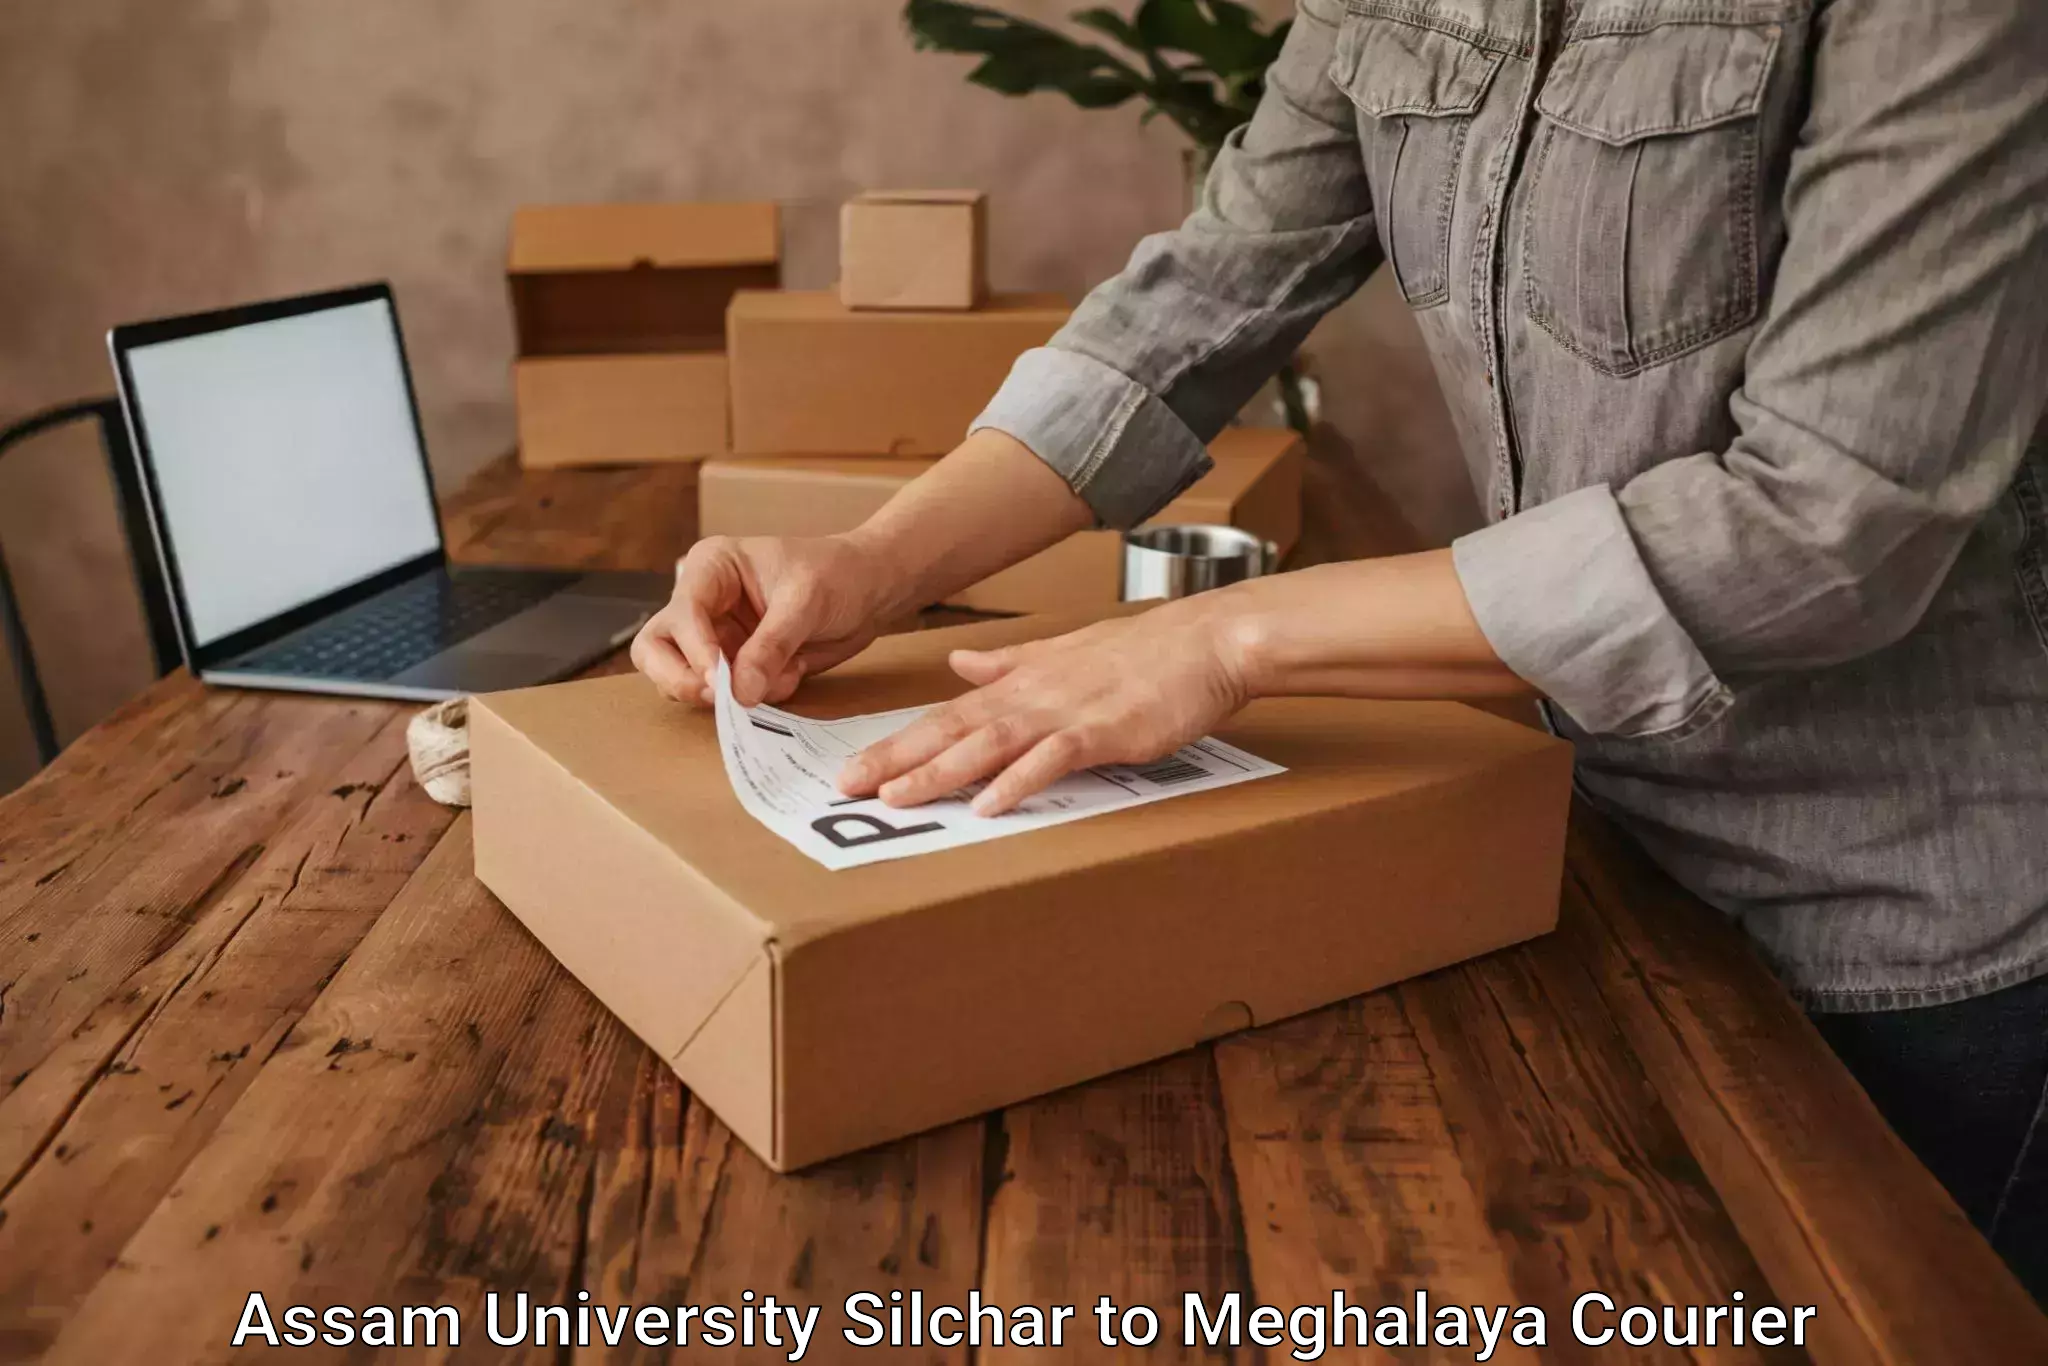 Cash on delivery service Assam University Silchar to North Eastern Hill University Shillong